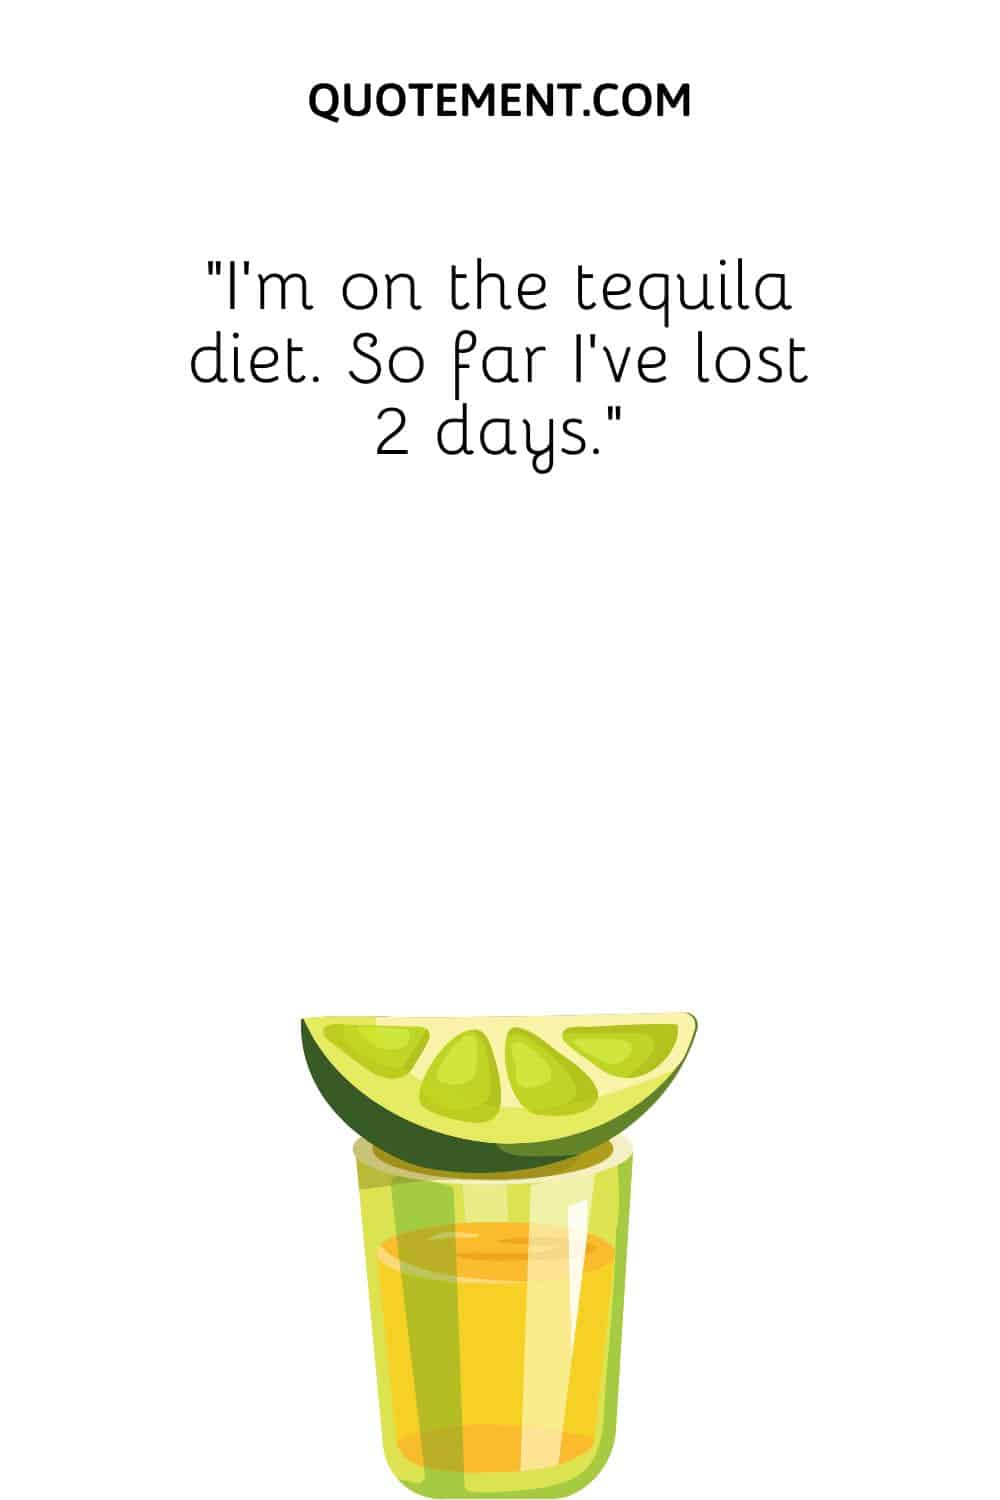 I’m on the tequila diet